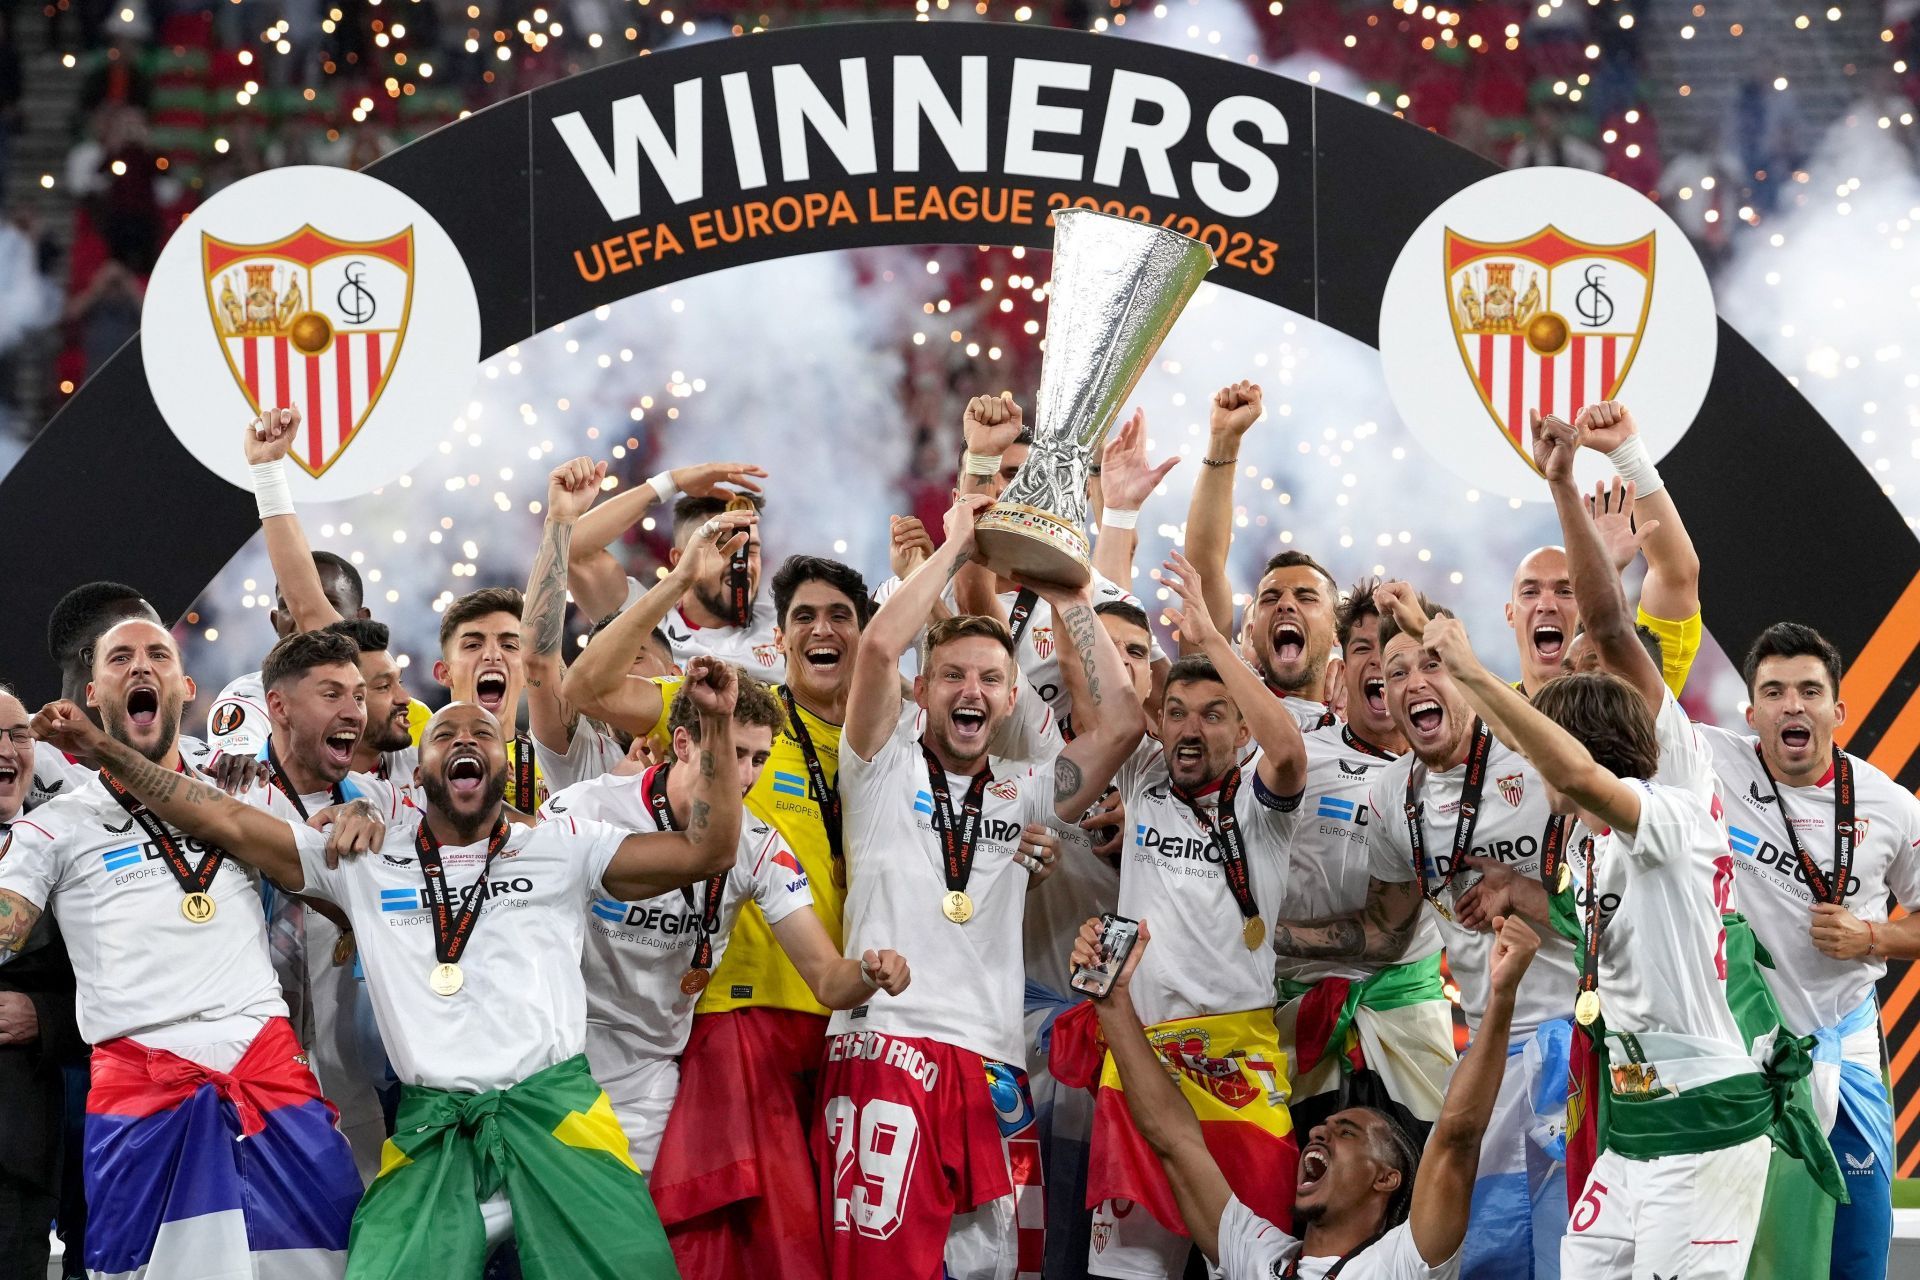 Sevilla are targeting their second UEFA Super Cup title against Manchester City